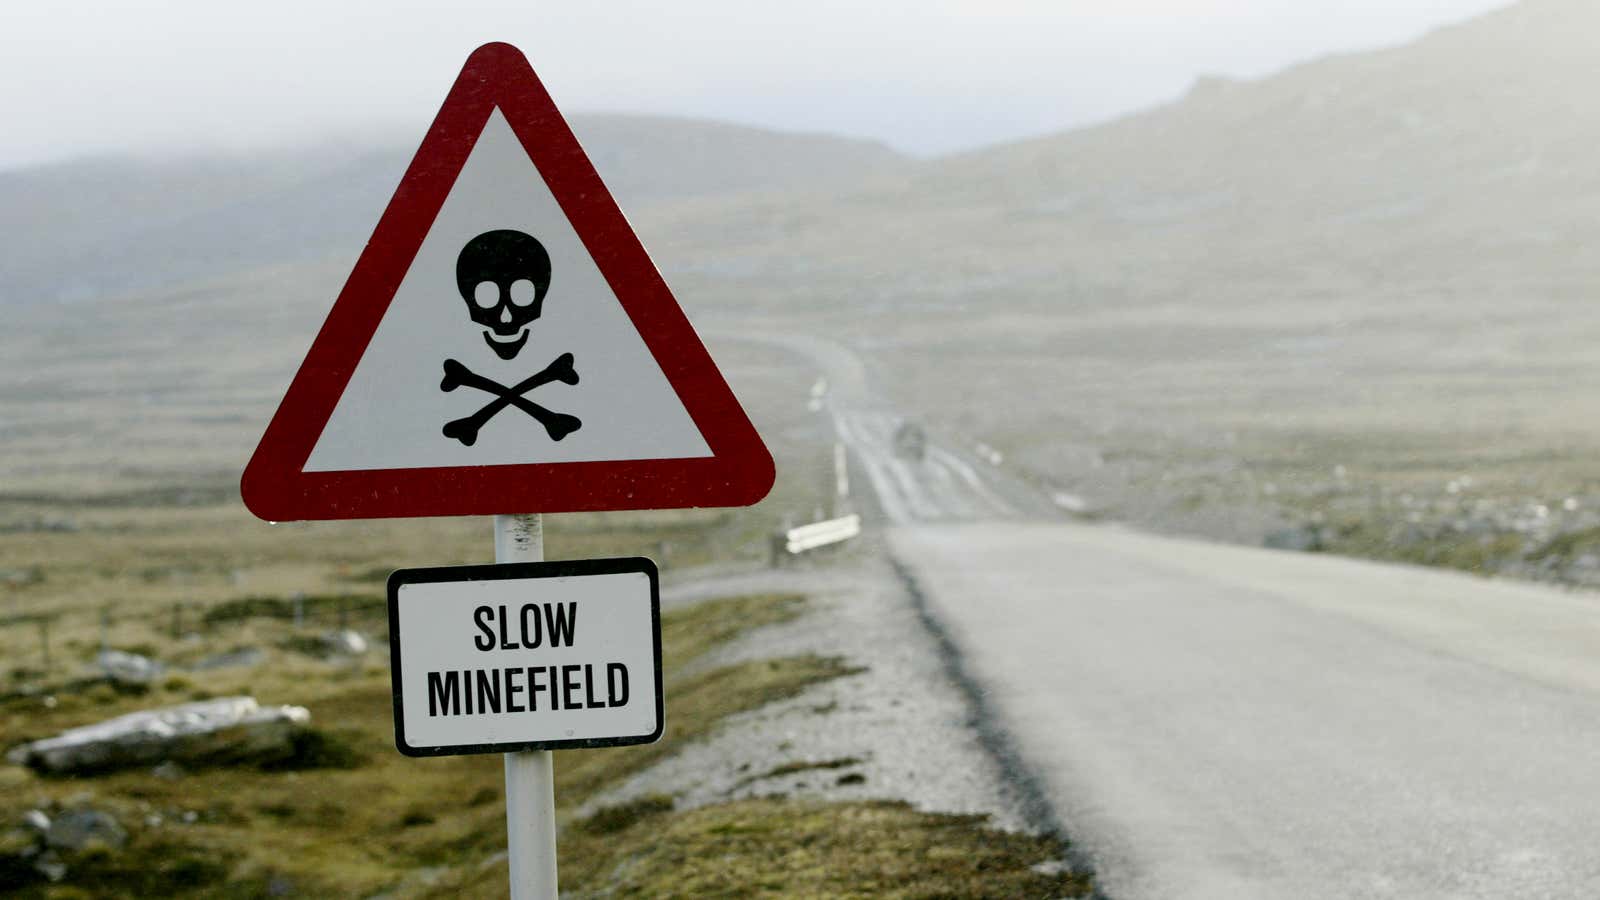 A warning sign against landmines on a road in the Falklands Island.